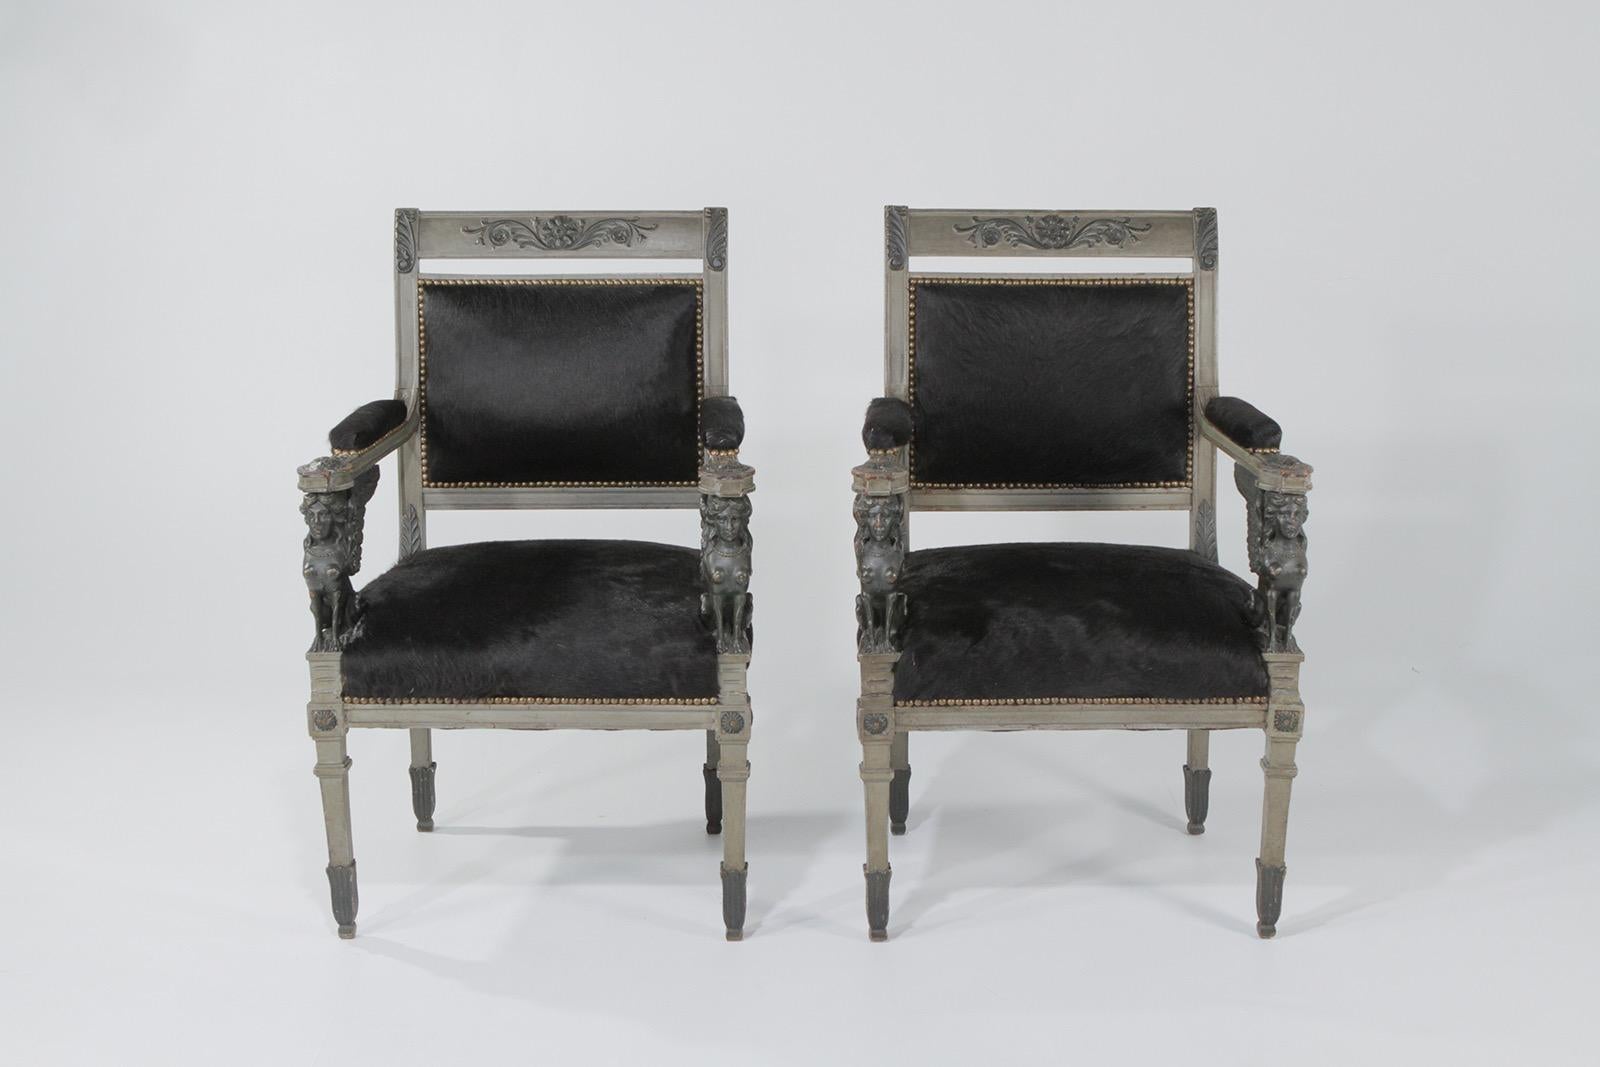 Superb Neoclassical Egyptian Revival Armchairs with Black Cowhide Upholstery 8